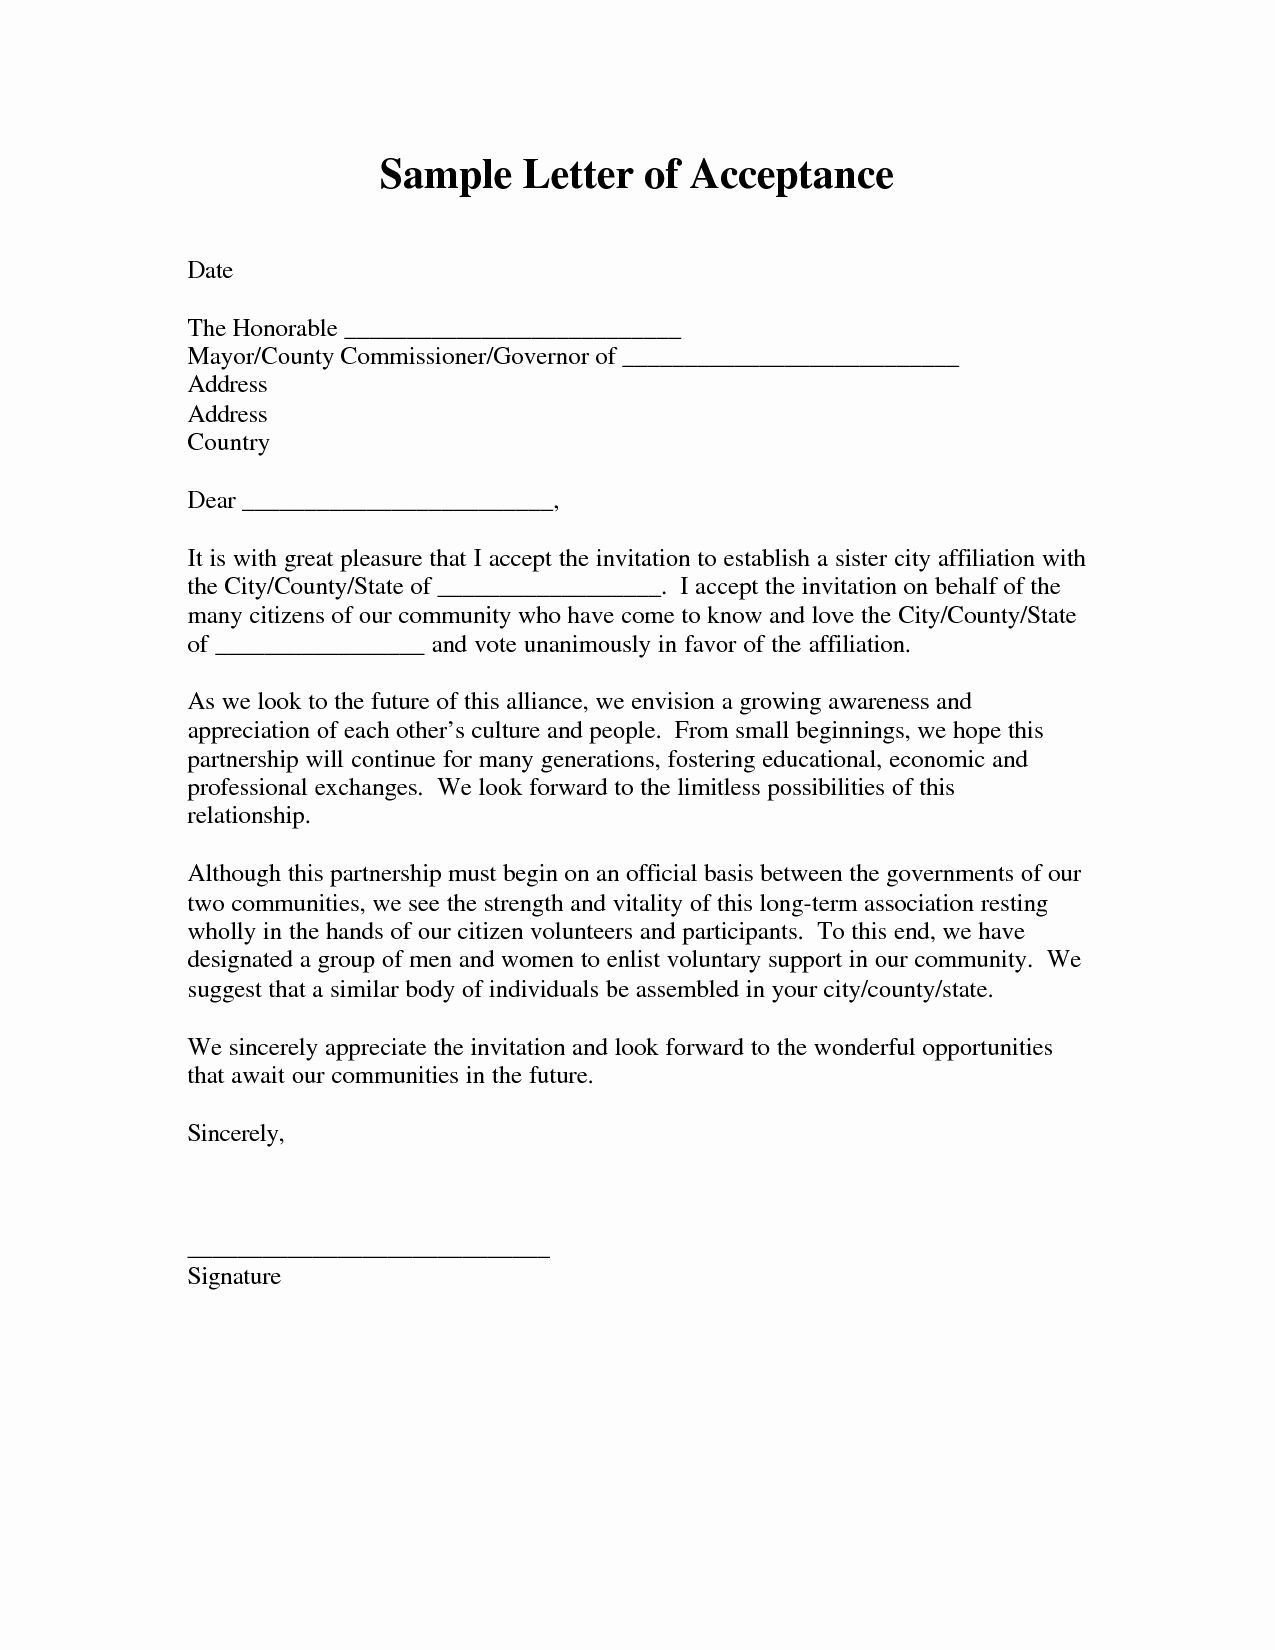 Types Of Letter format Fresh Tender Acceptance Letter Acceptance Period Depends On